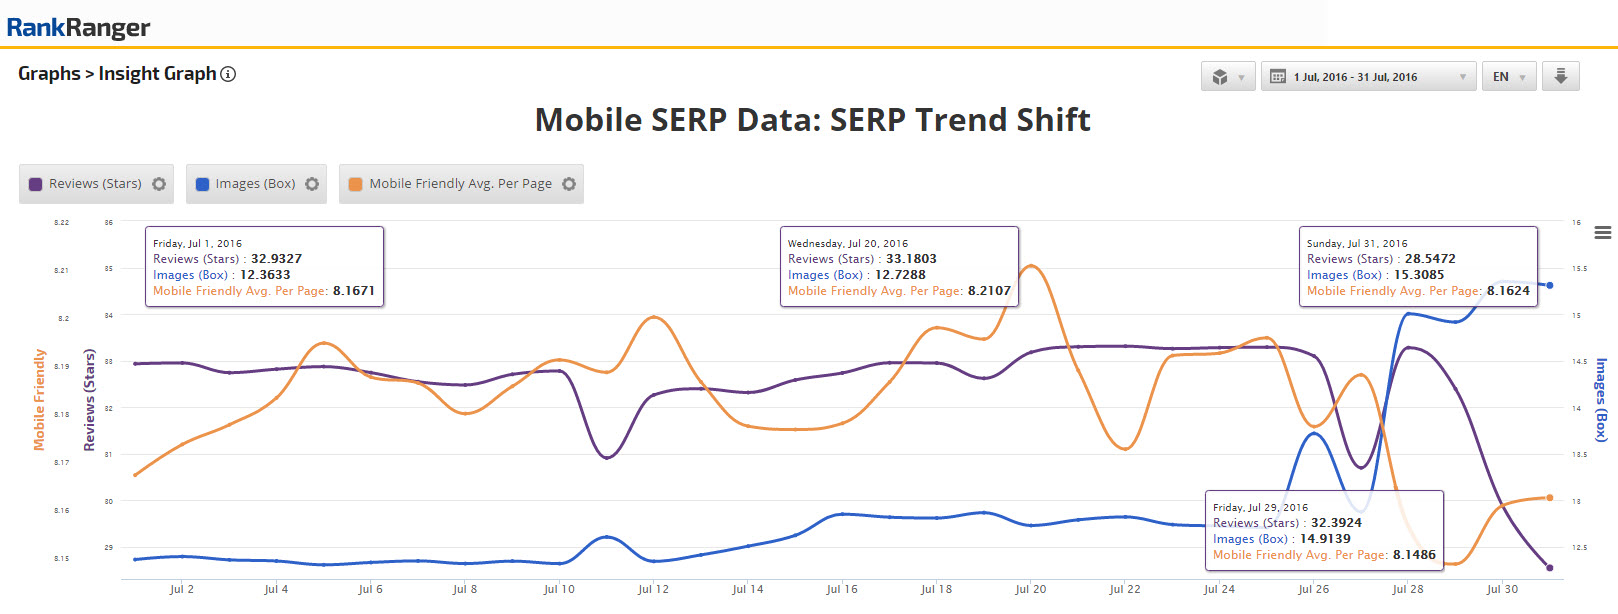 Additional SERP Features on Mobile Undergo a Data Shift